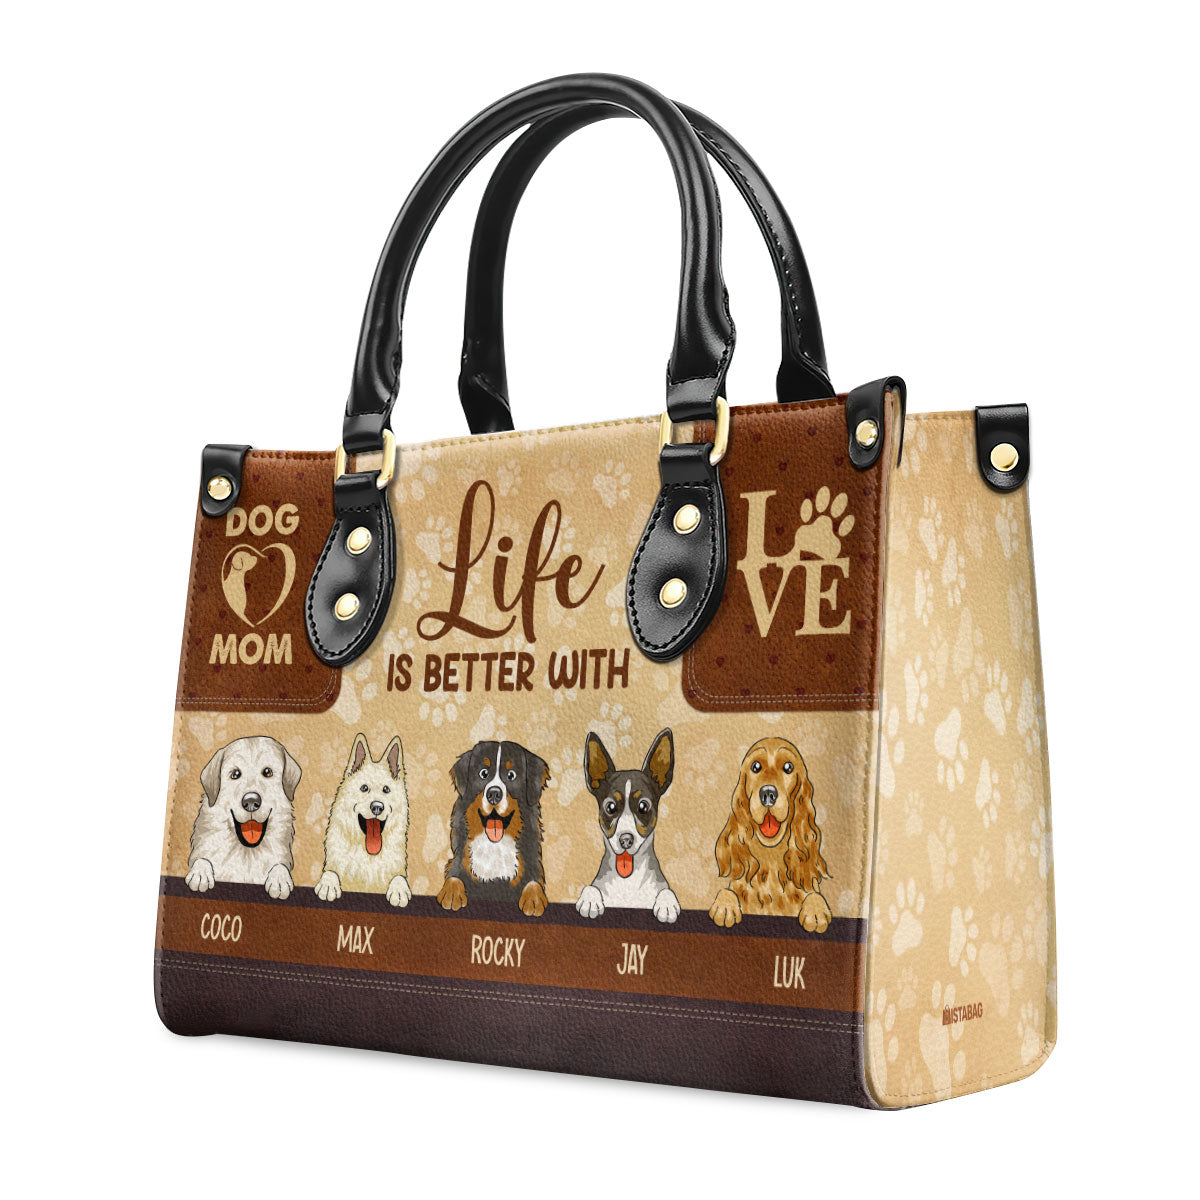 Life Is Better With Dogs - Personalized Leather Handbag STB153